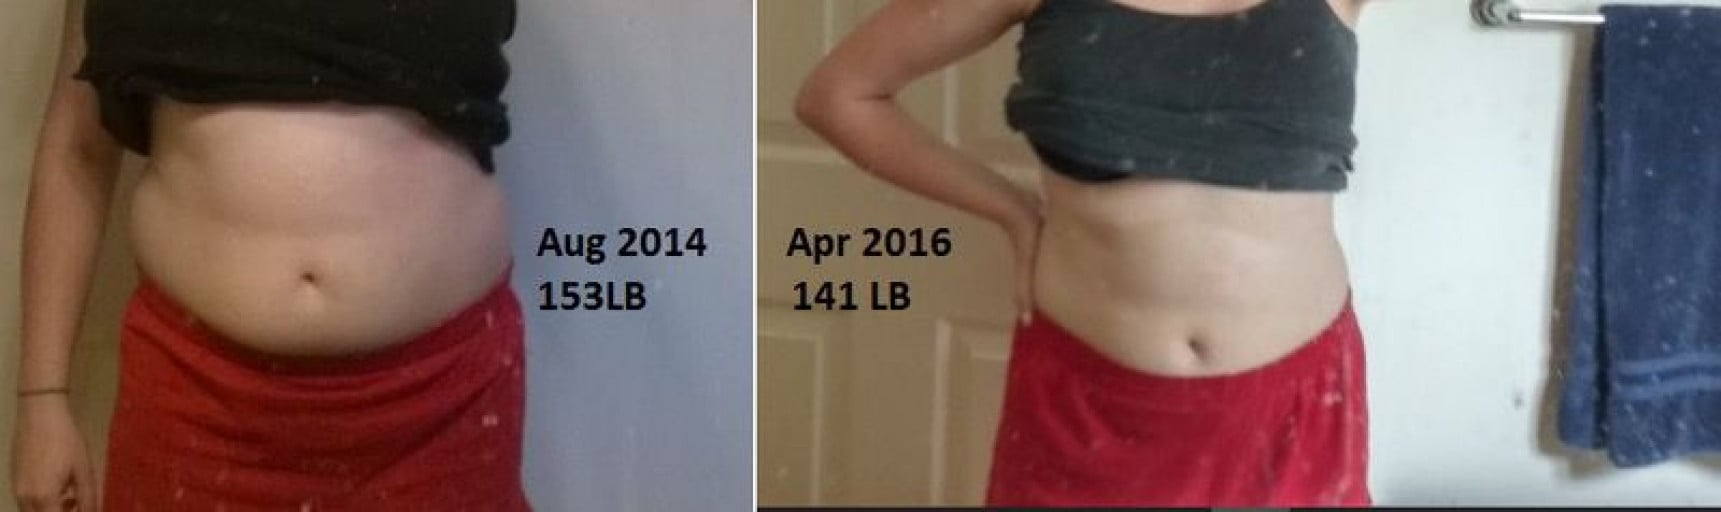 Weight Loss Success Story: 32 Year Old Woman Sheds 12 Pounds Through Diet and Exercise